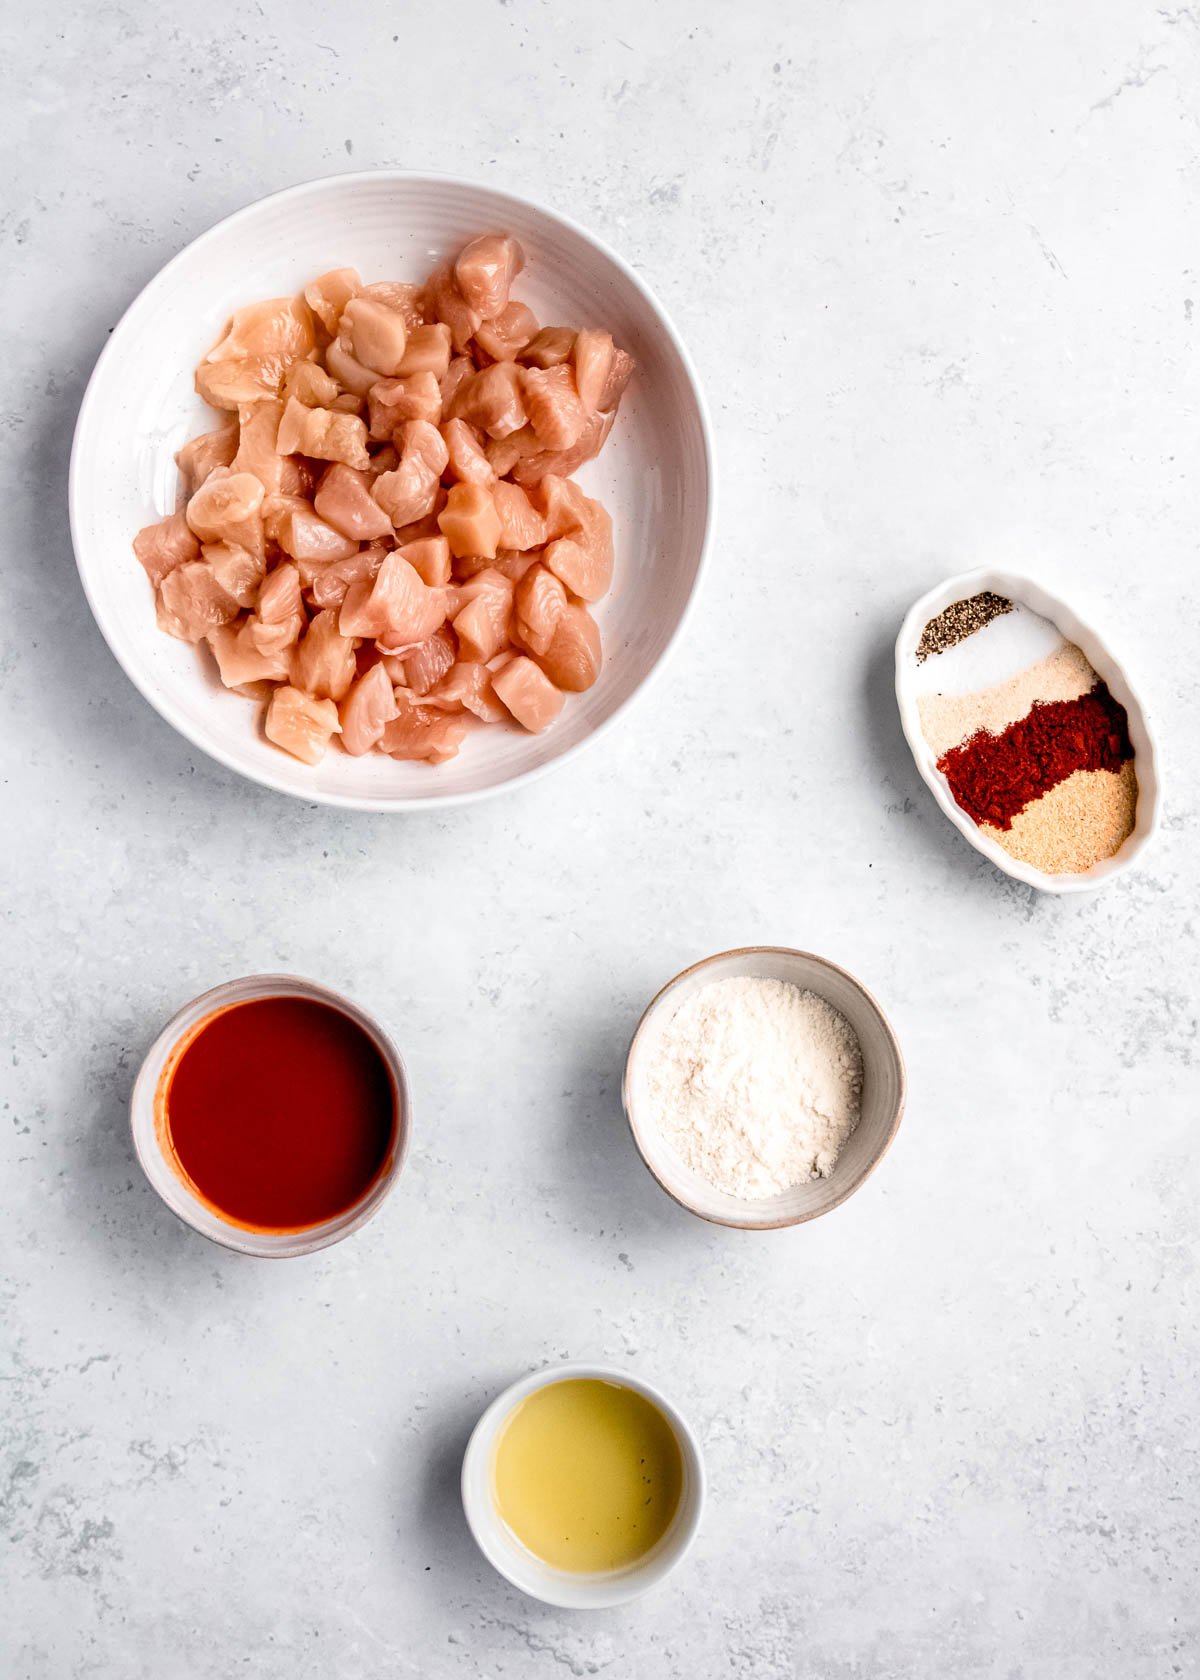 buffalo chicken bite ingredients on a white table